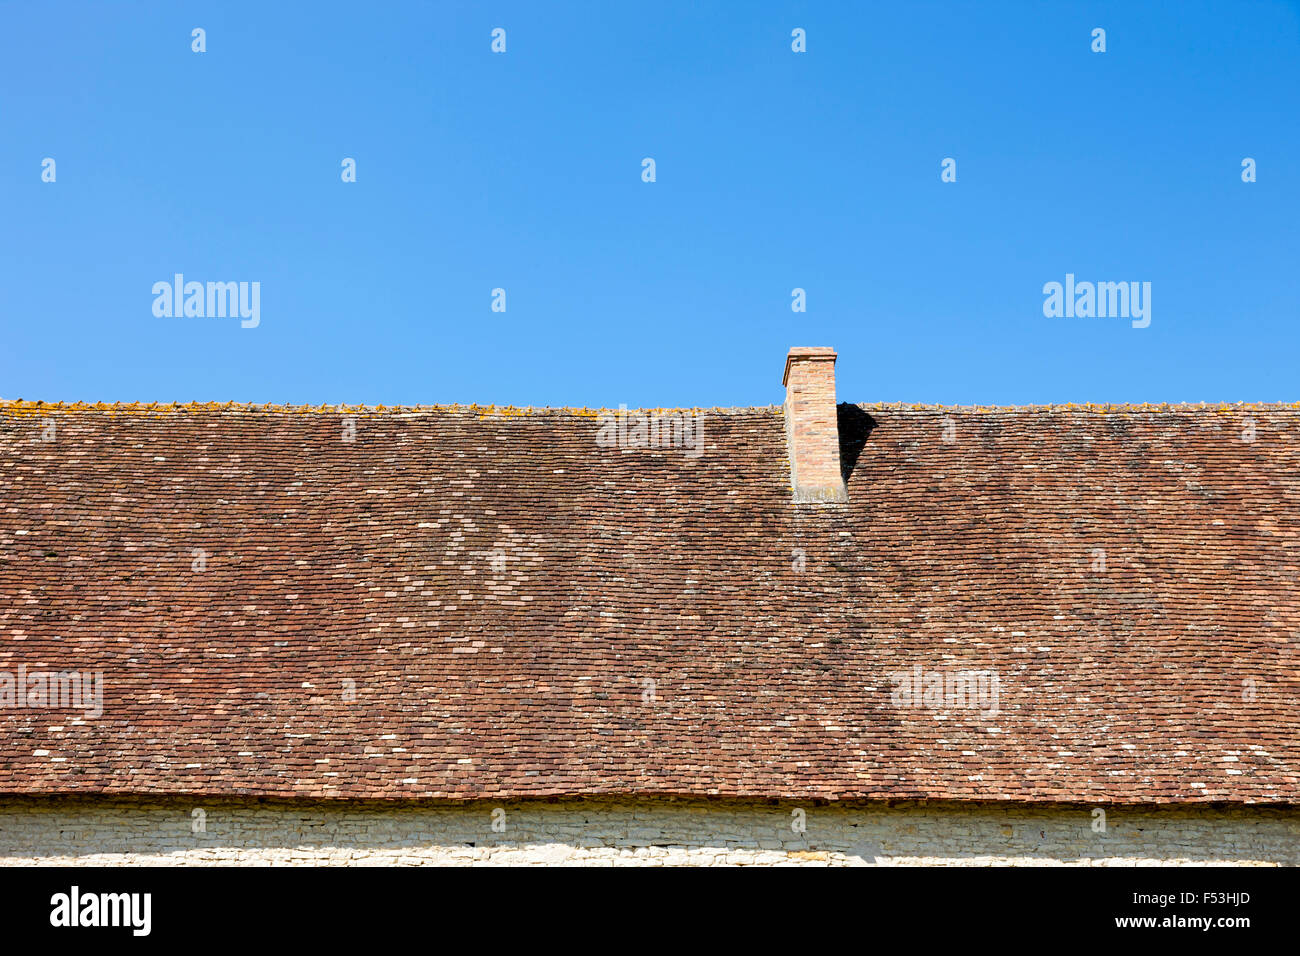 Old tiled roof Stock Photo